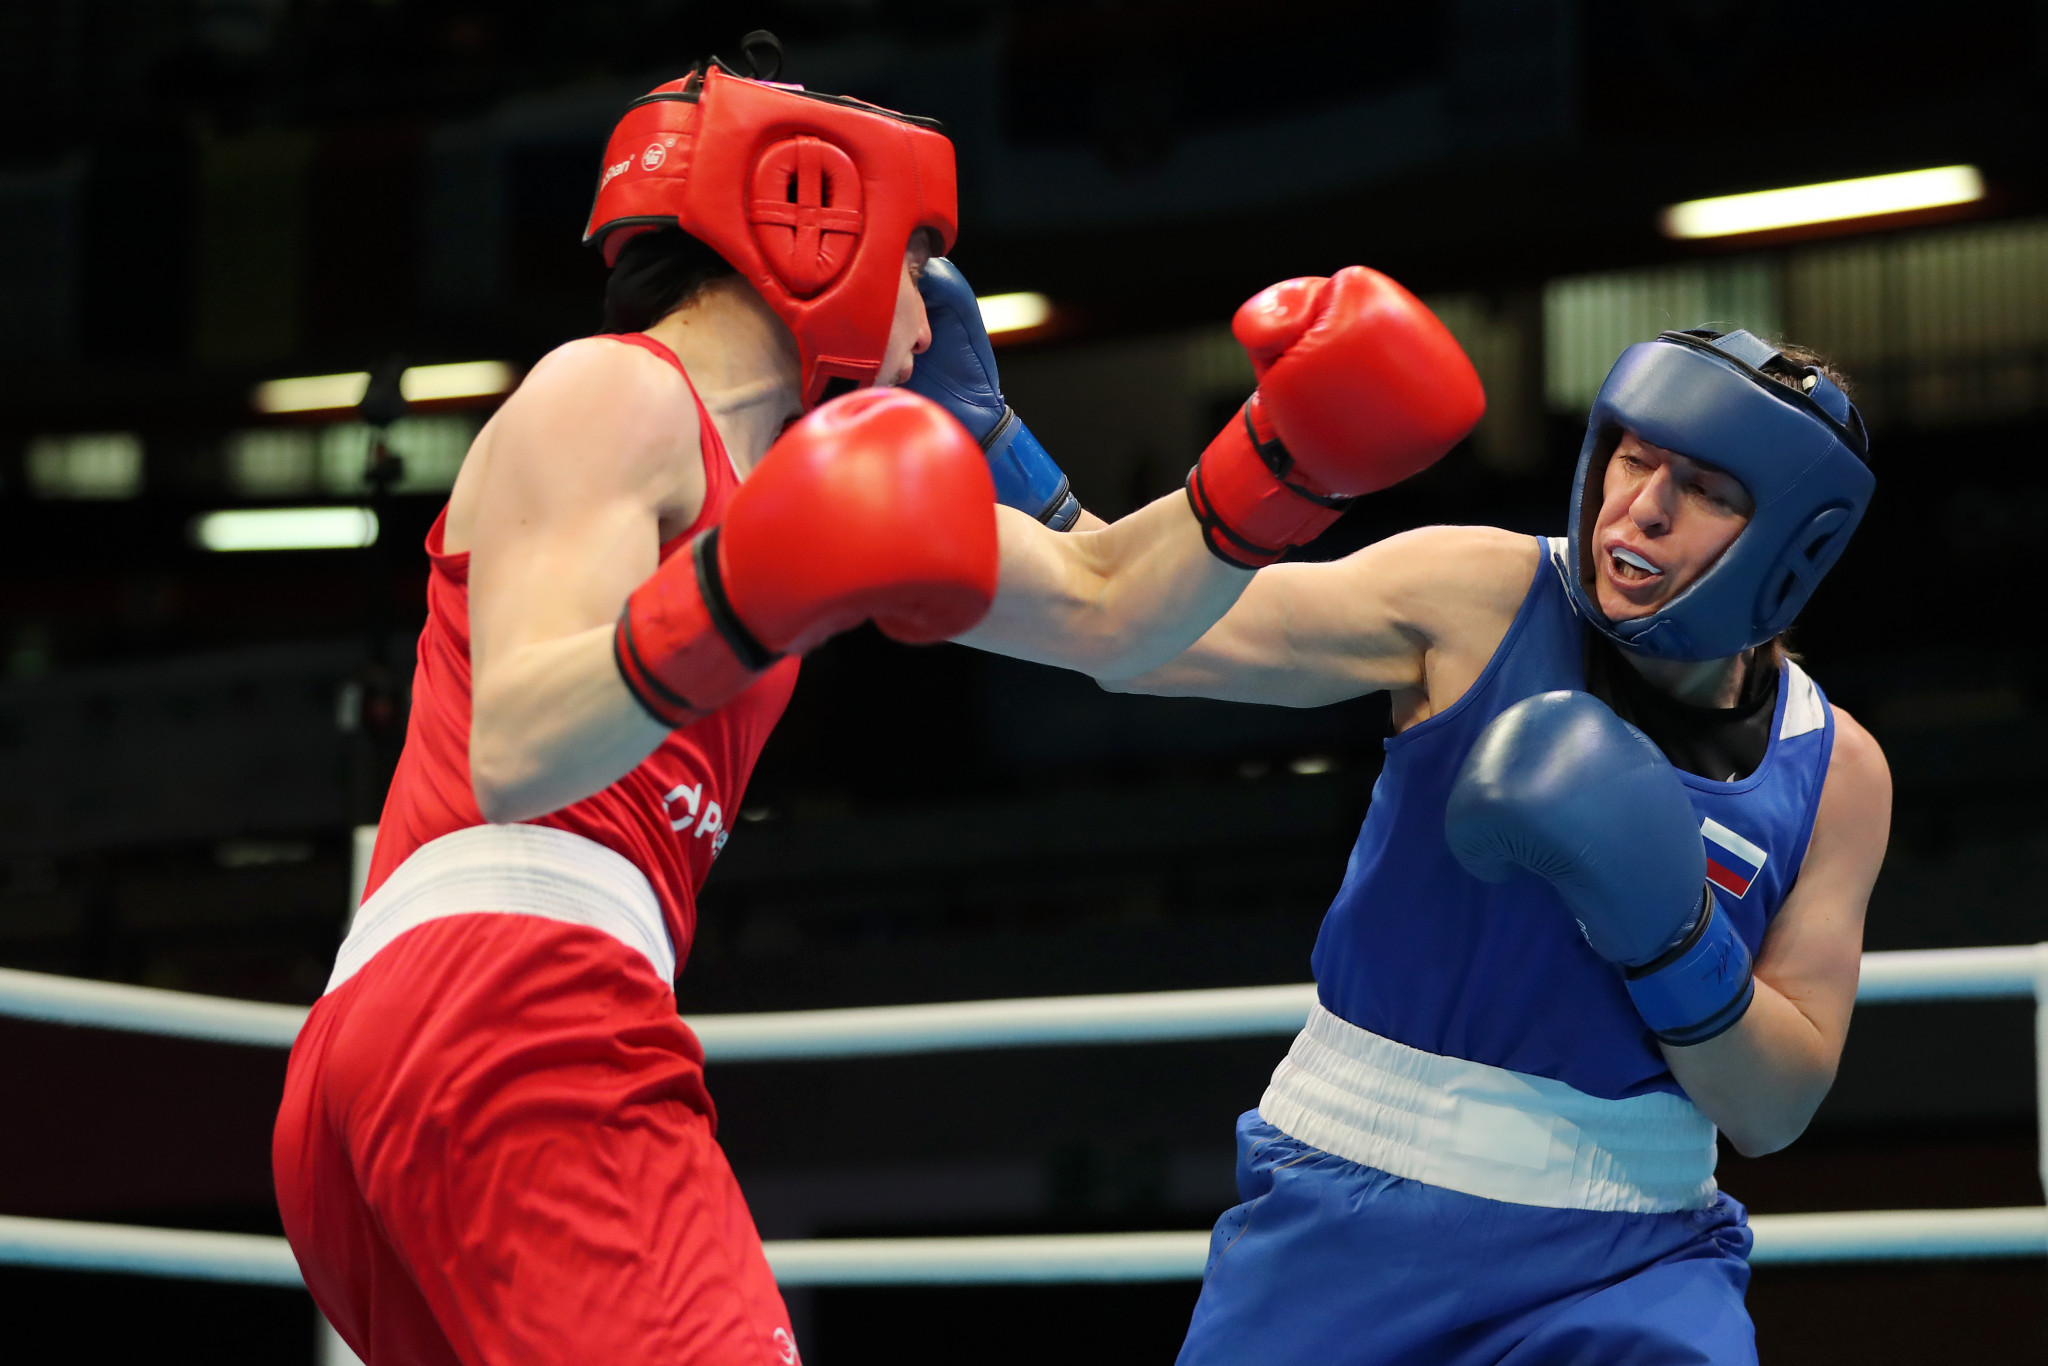 Russian boxers have been permitted by the IBA to compete under their country's flag ©Getty Images